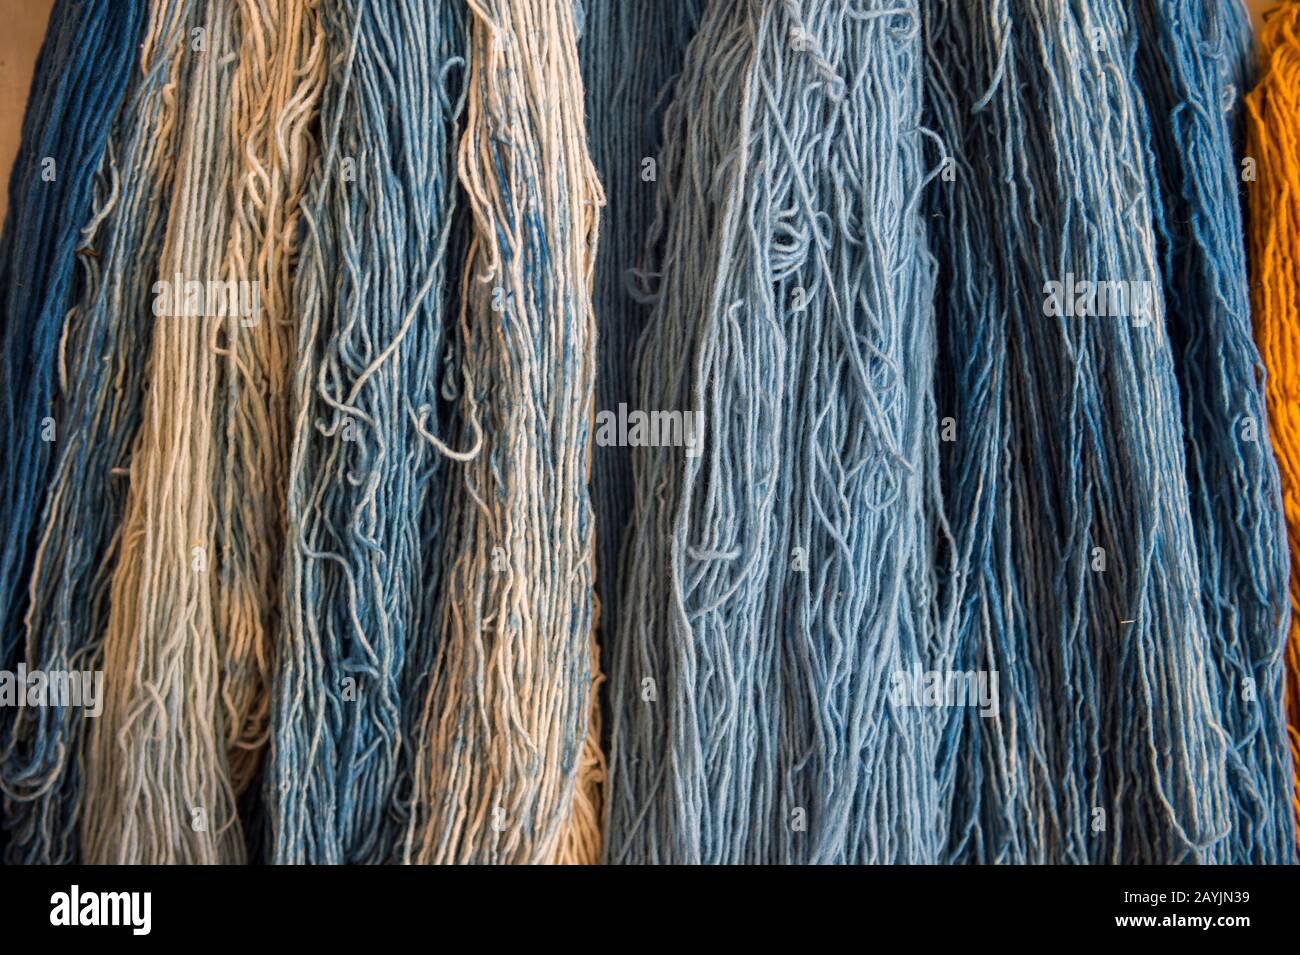 Wool dyed with natural dyes at a weavers home in Teotitlan del Valle, a small town in the Valles Centrales Region near Oaxaca, southern Mexico. Stock Photo